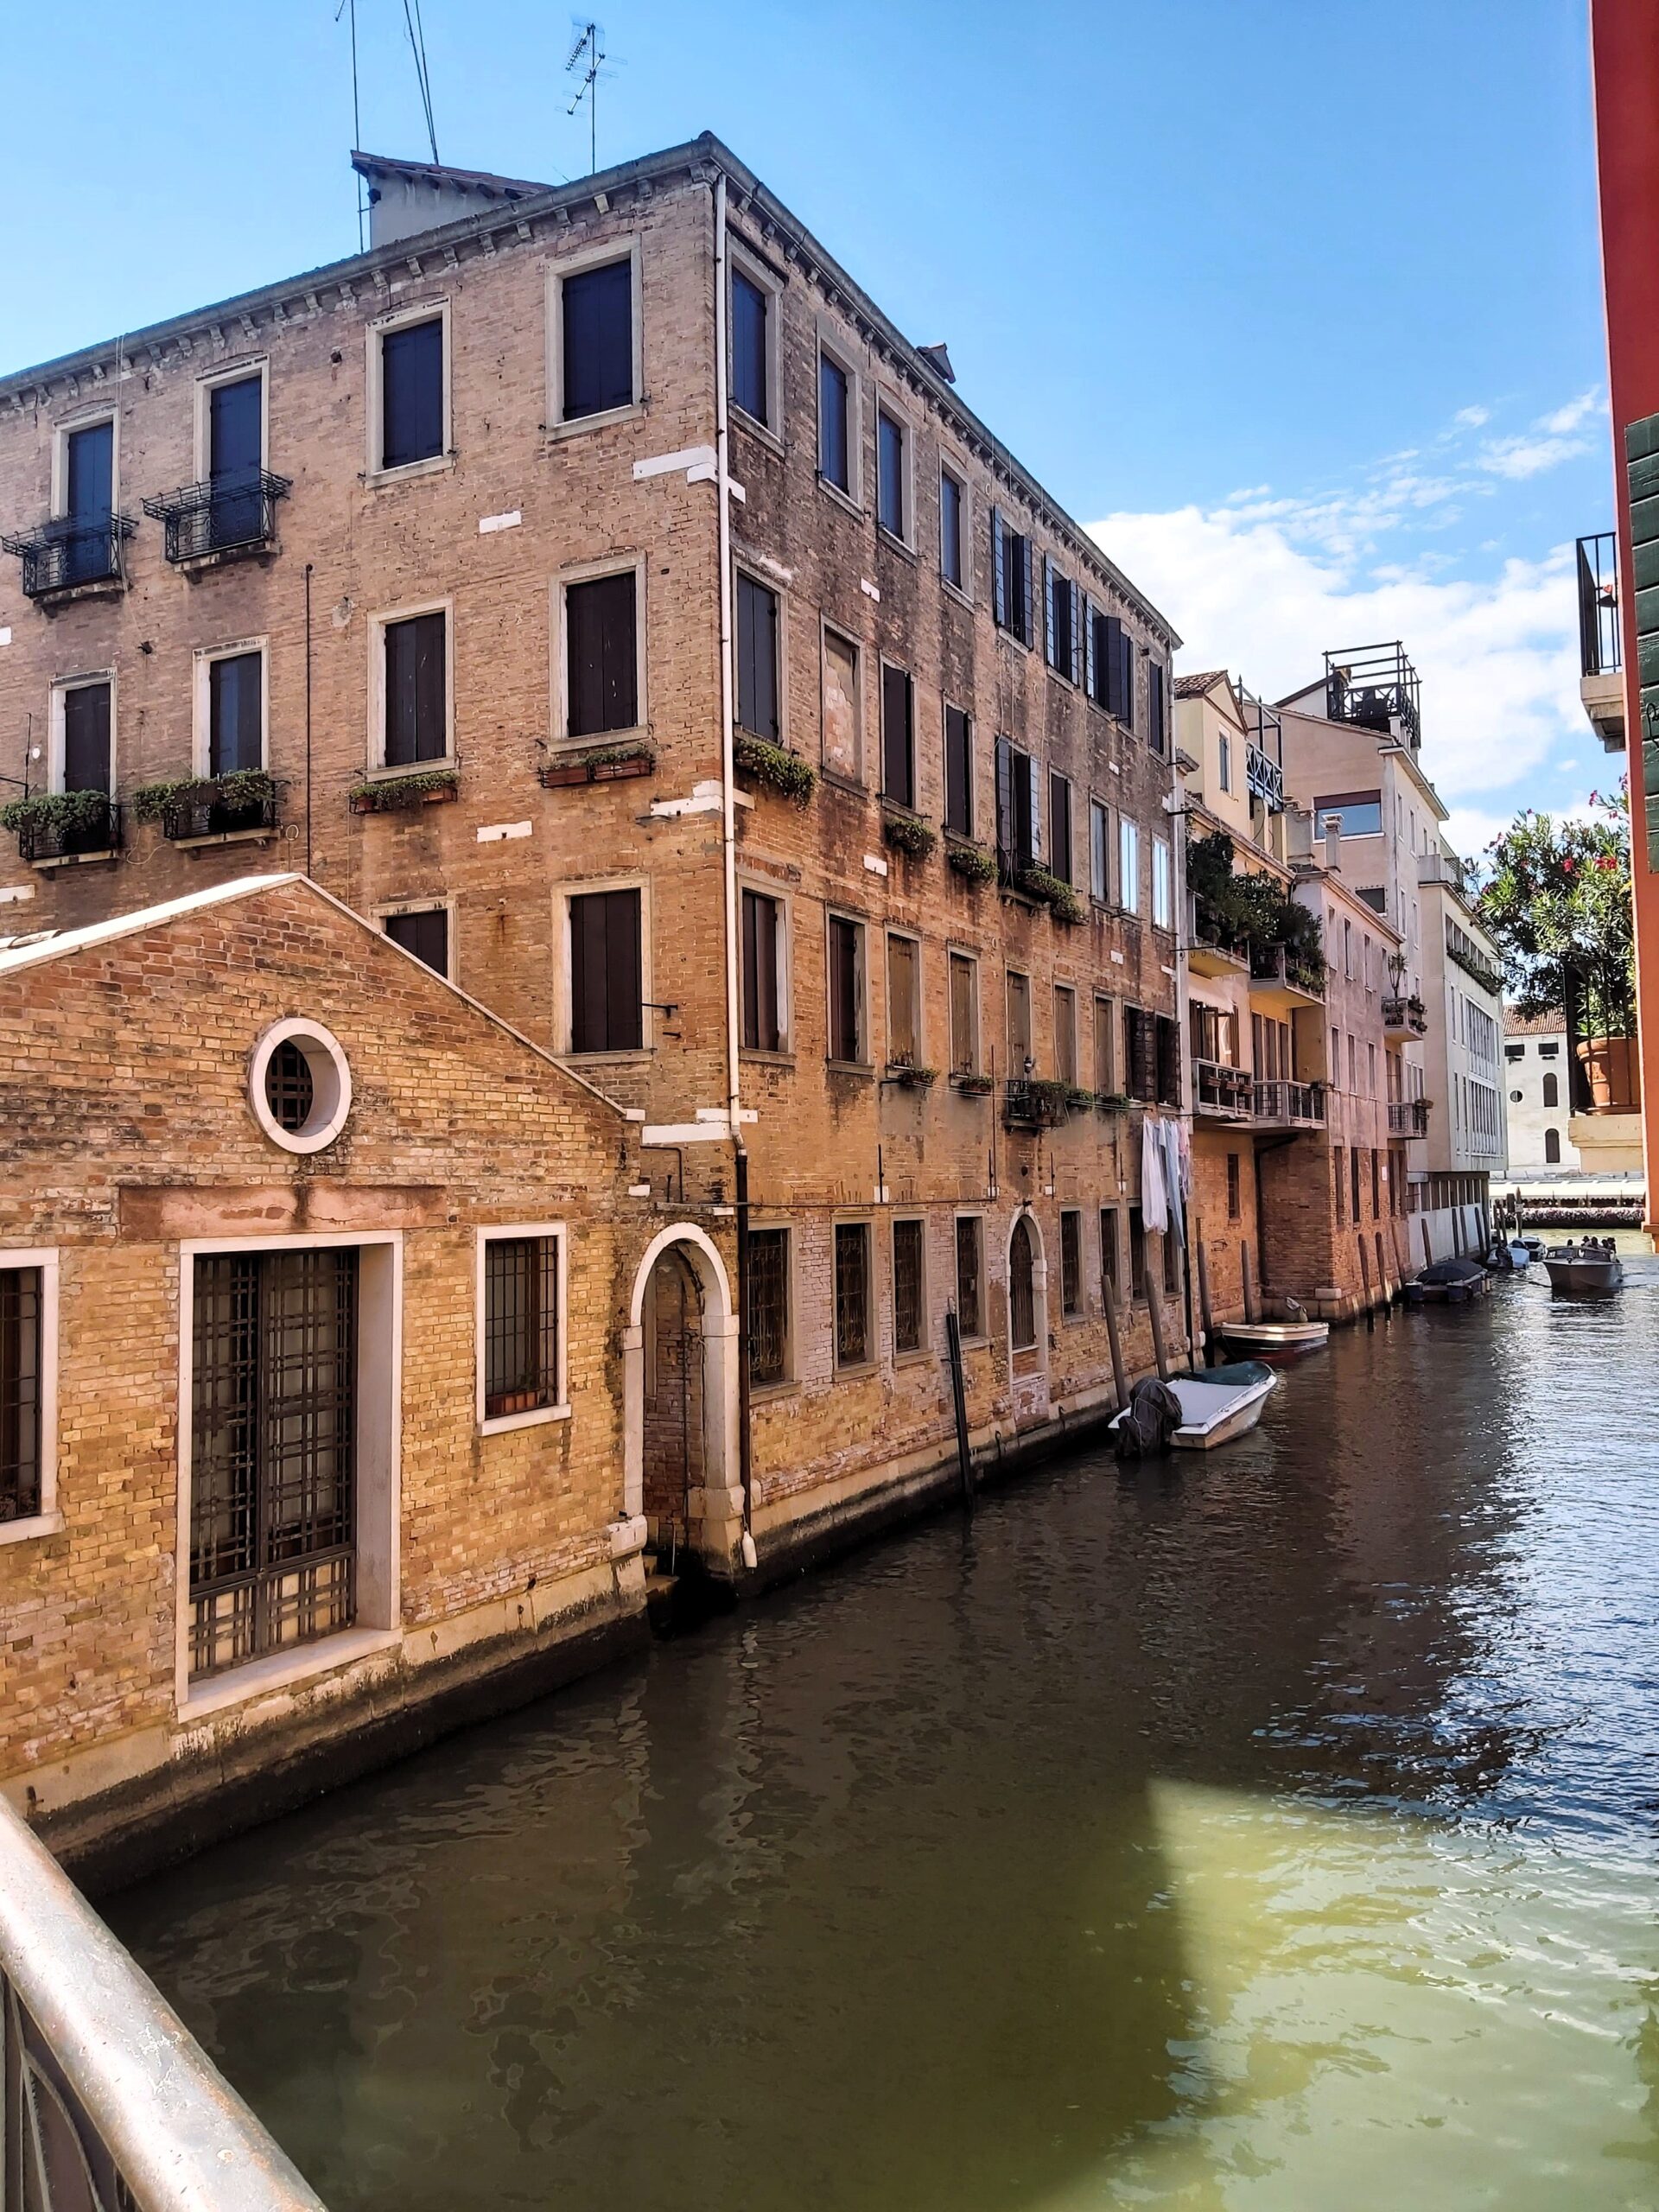 A view of a canal and a selection of brick buildings in Venice, Italy